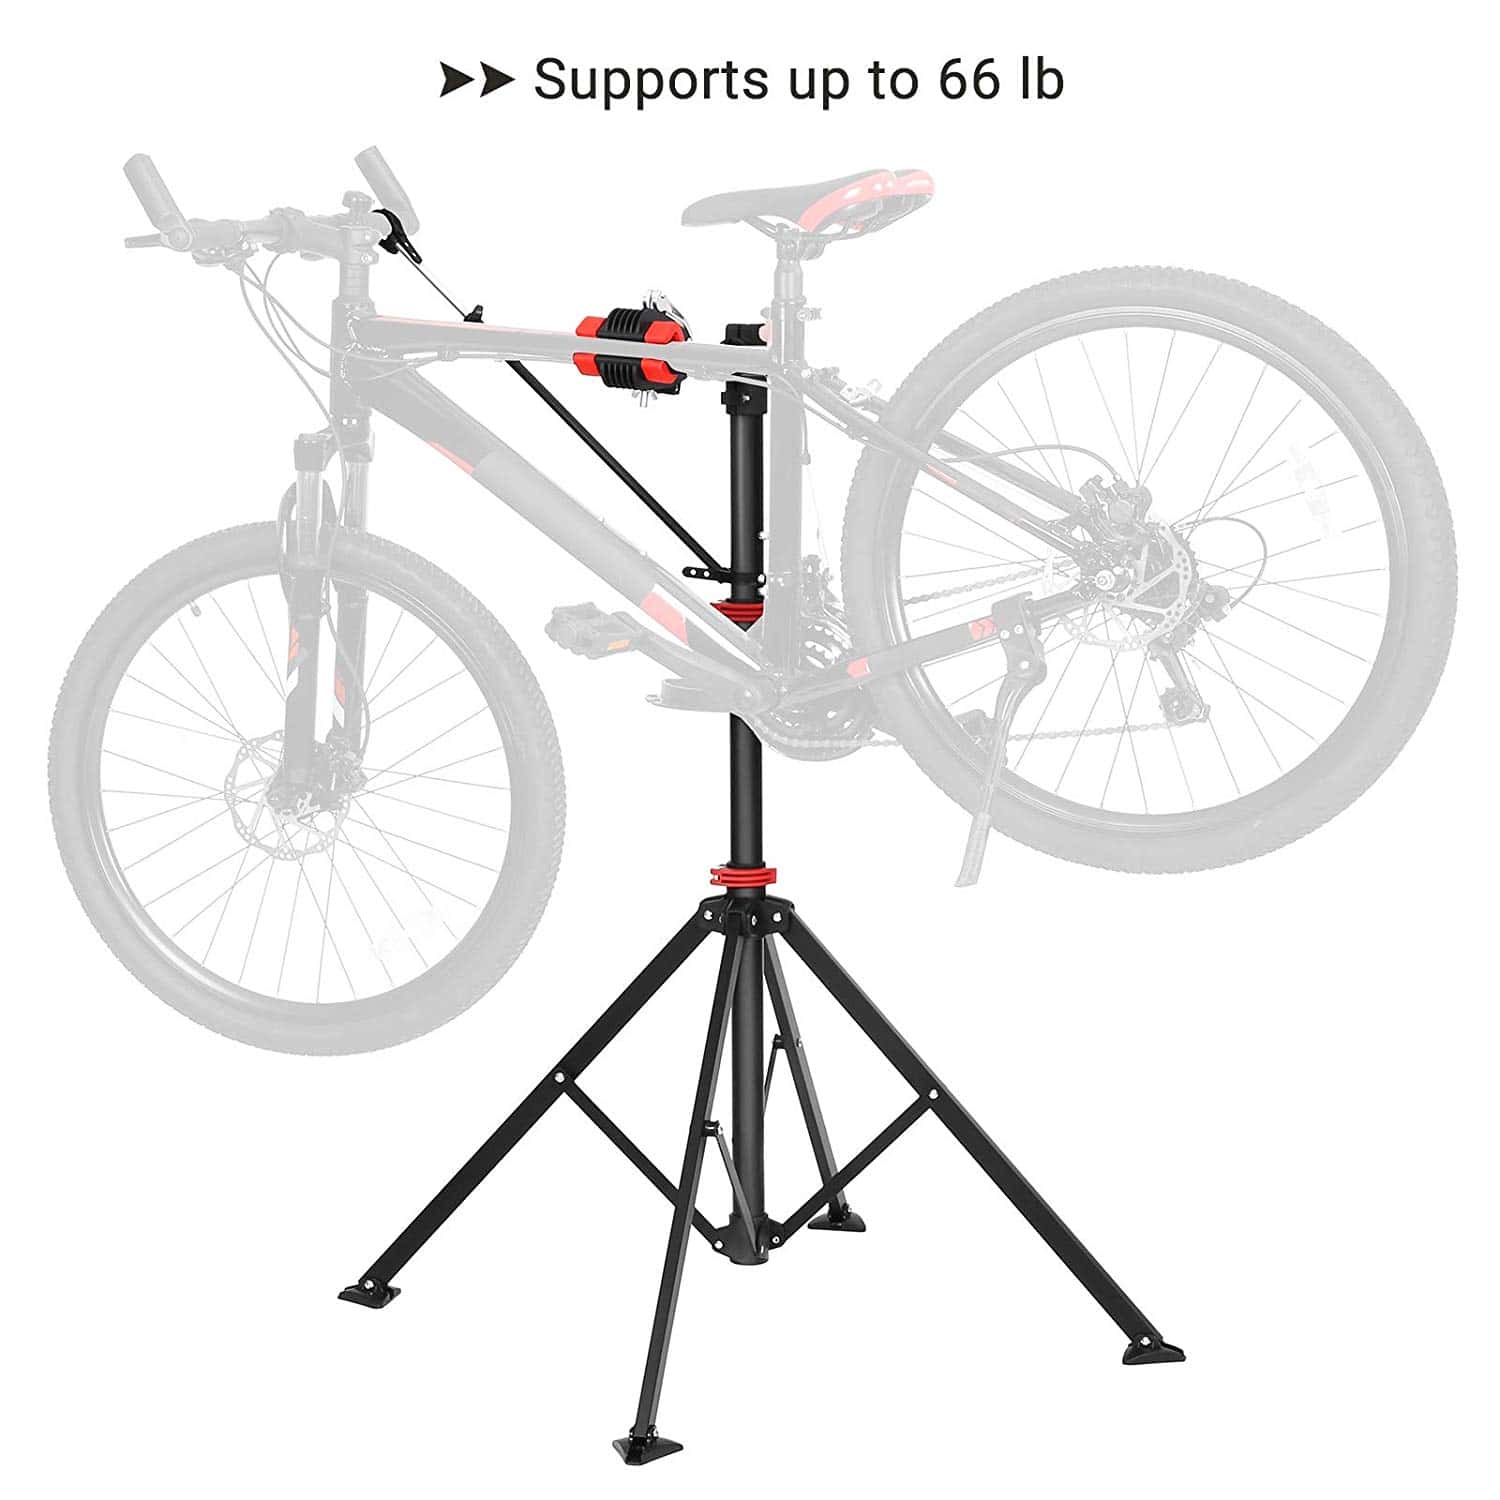 SONGMICS Bike Repair Stand with Multiple Quick Release Design USBR06B